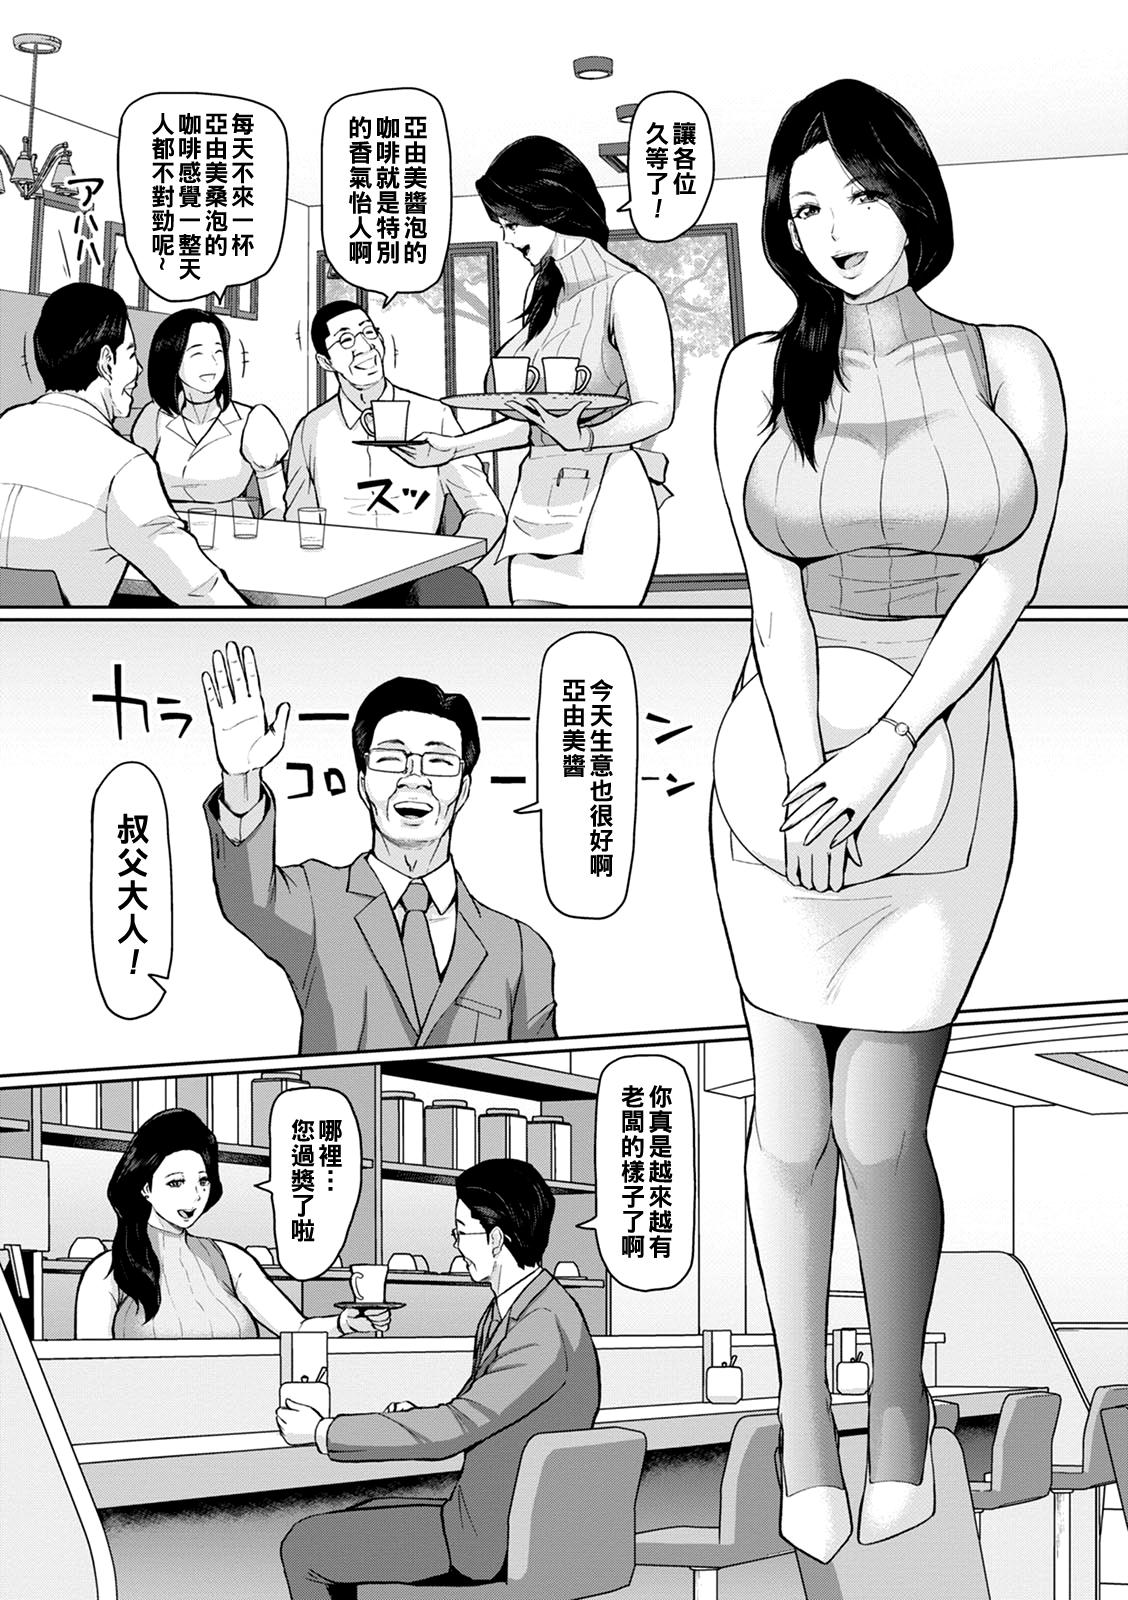 Black Woman 淫姦オークション 前編（Chinese） Colombiana - Page 2